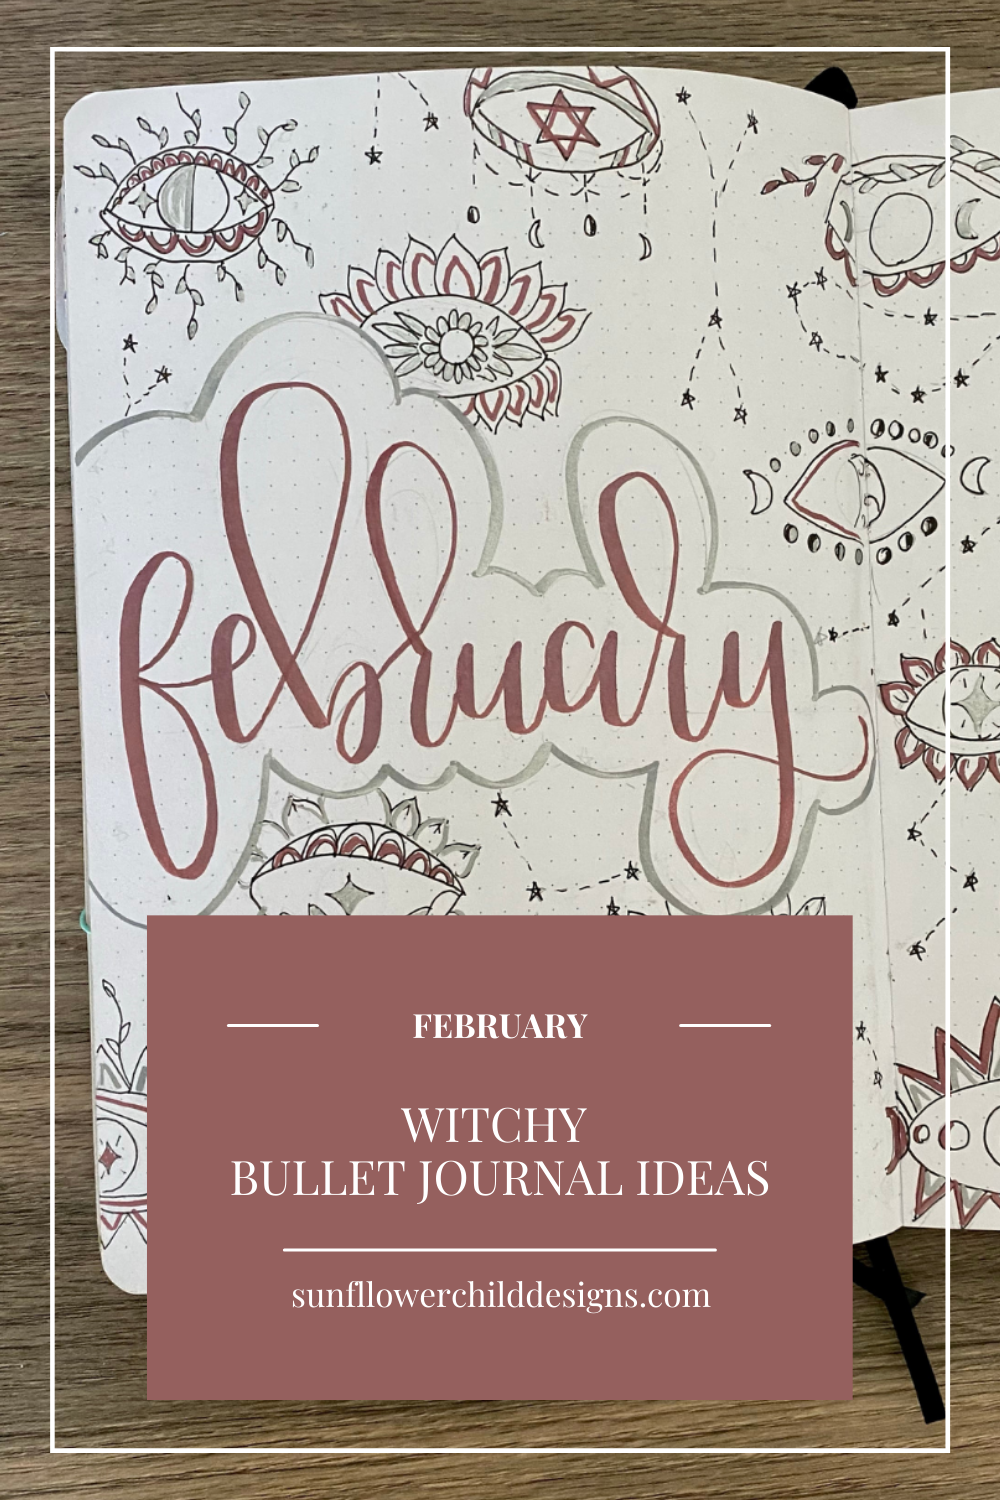 witchy-bullet-journal-ideas-february-bullet-journal-ideas 3.png